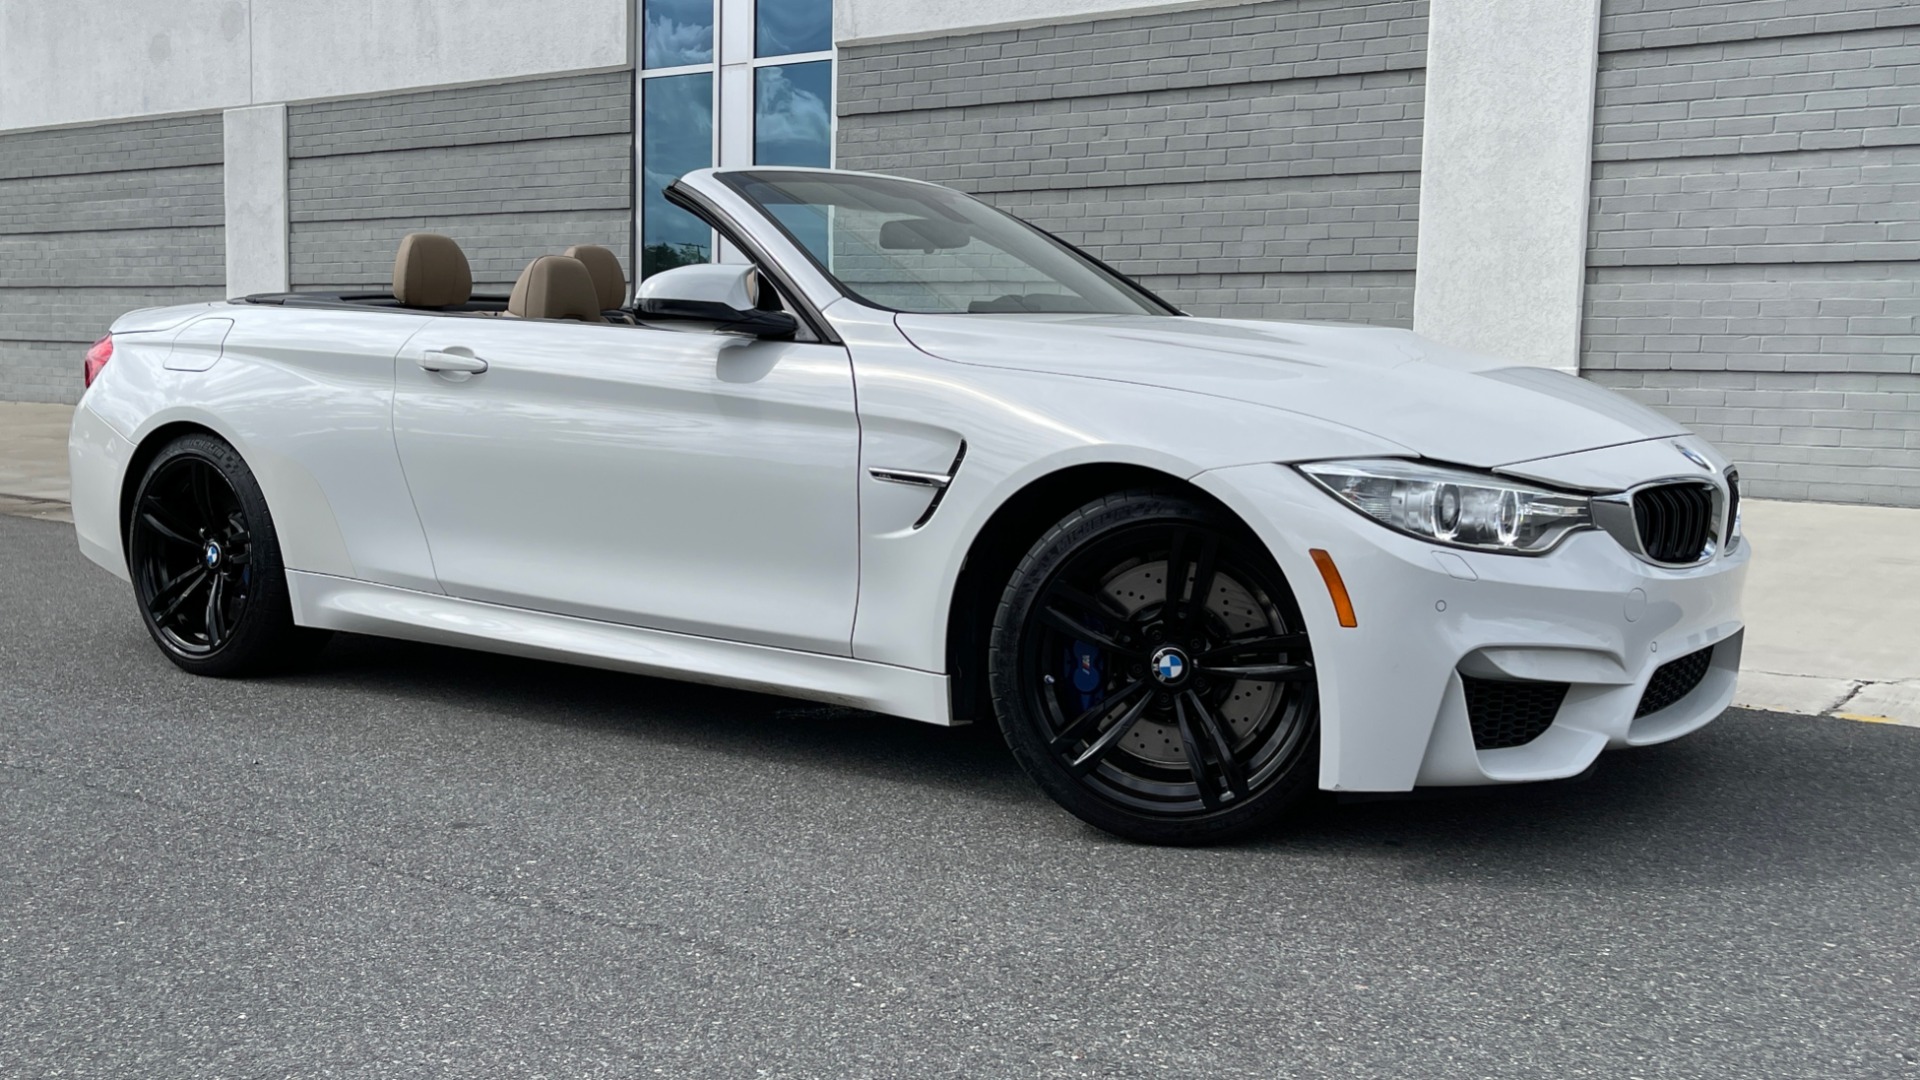 Used 2016 BMW M4 CONVERTIBLE 3.0L / 7-SPD AUTO / EXECUTIVE / ADAPT M SUSP / REARVIEW for sale Sold at Formula Imports in Charlotte NC 28227 7